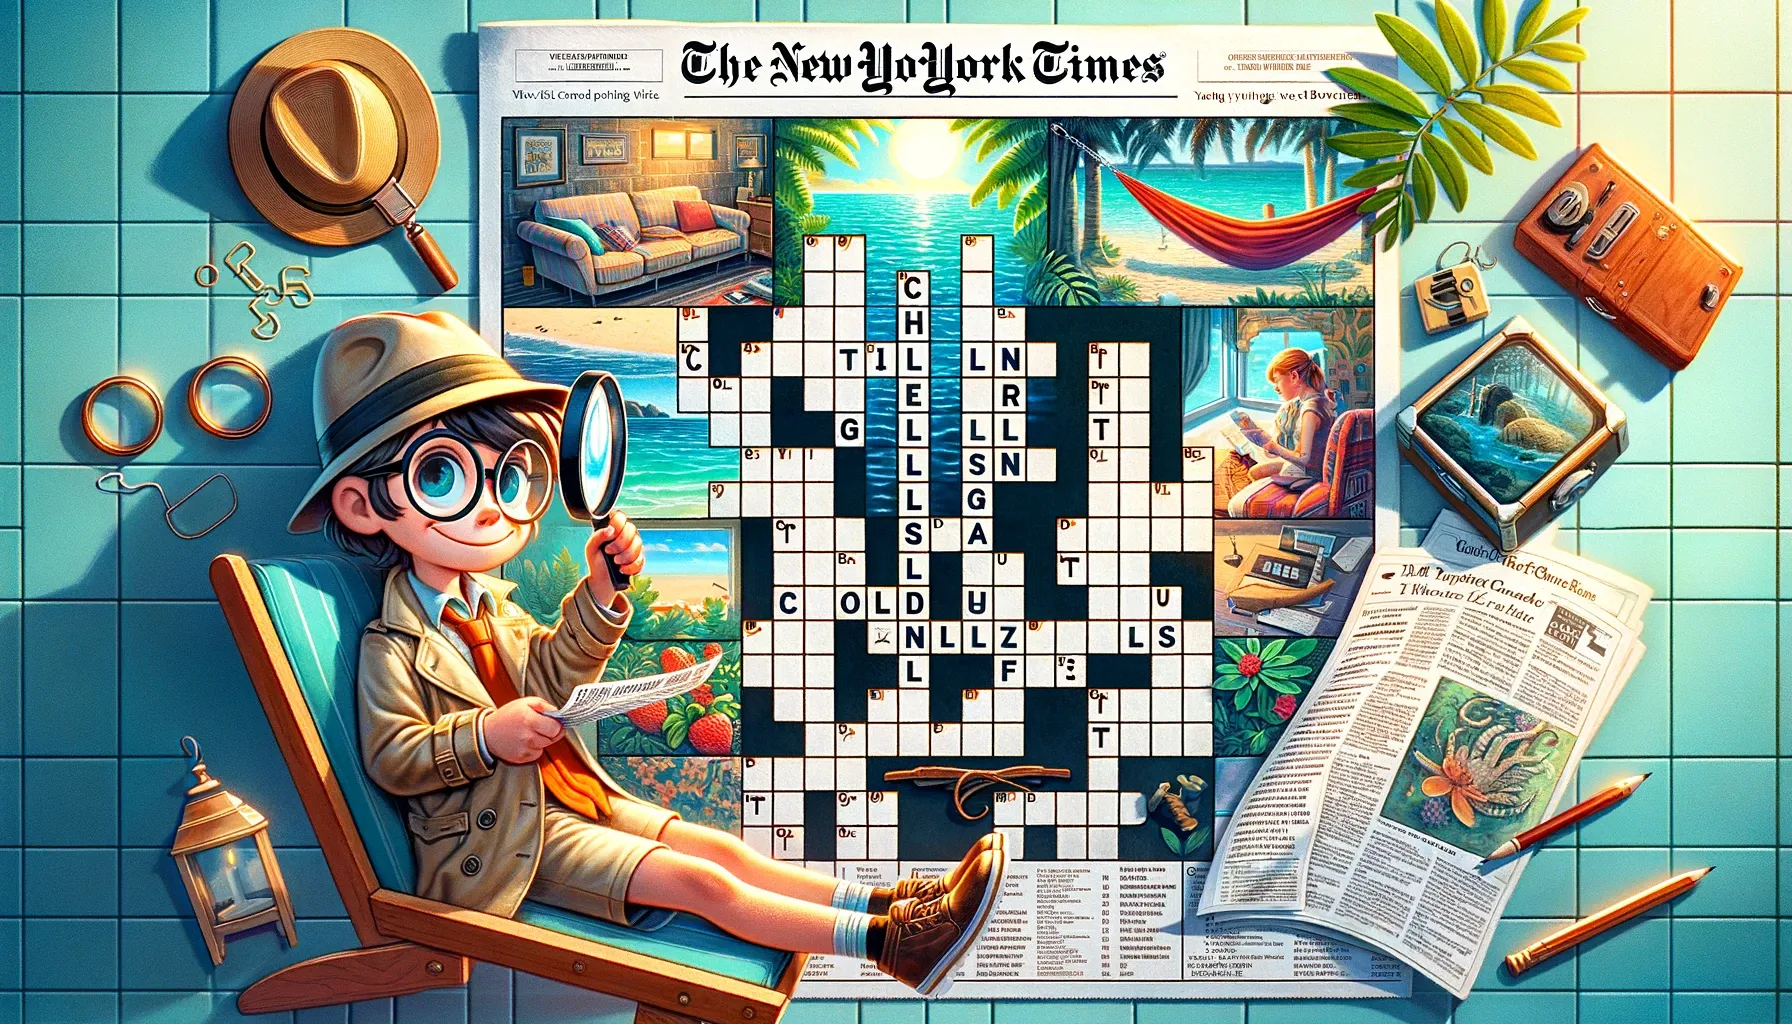 What Does Chilling Time NYT Mean in a Crossword Puzzle?